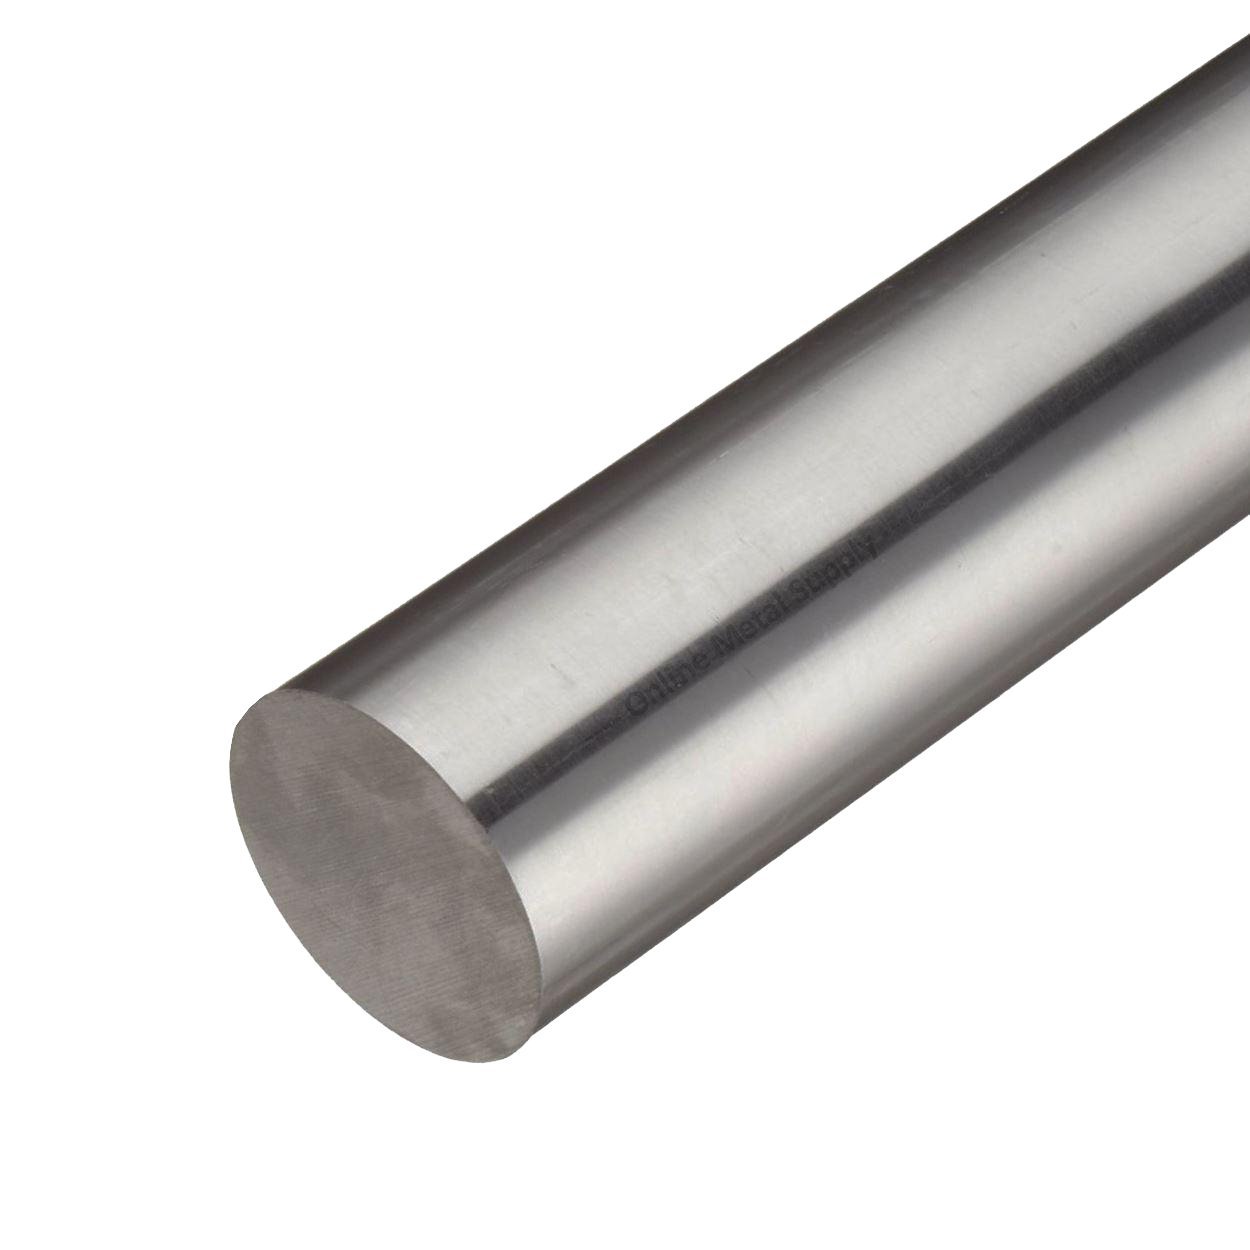 D62 Stainless Steel Rod 316 image 1